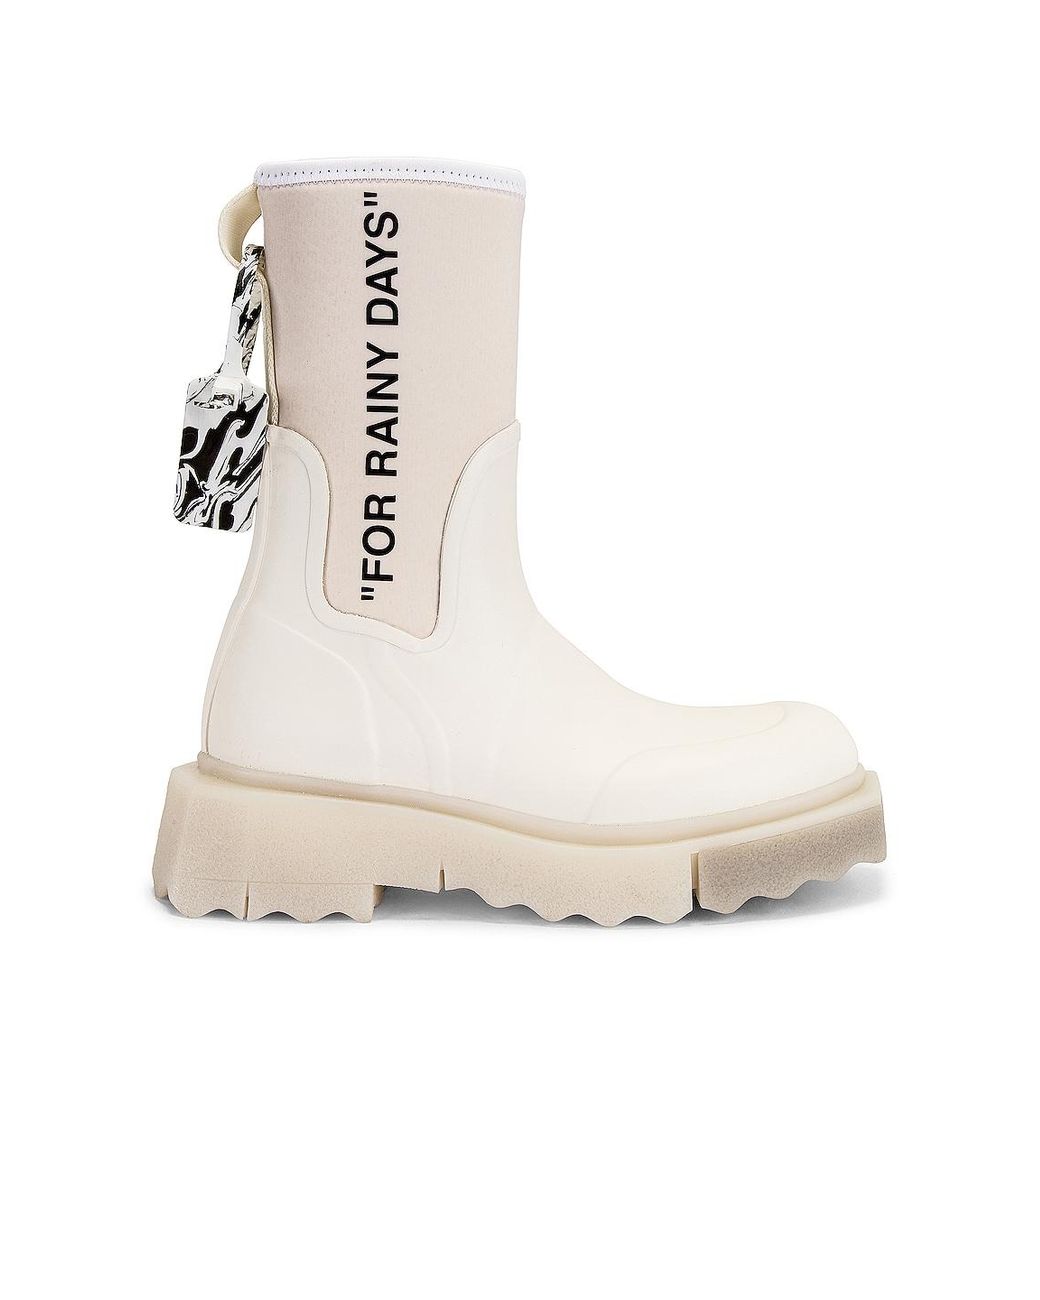 Off-White c/o Virgil Abloh For Rainy Days Rubber Boot in White | Lyst